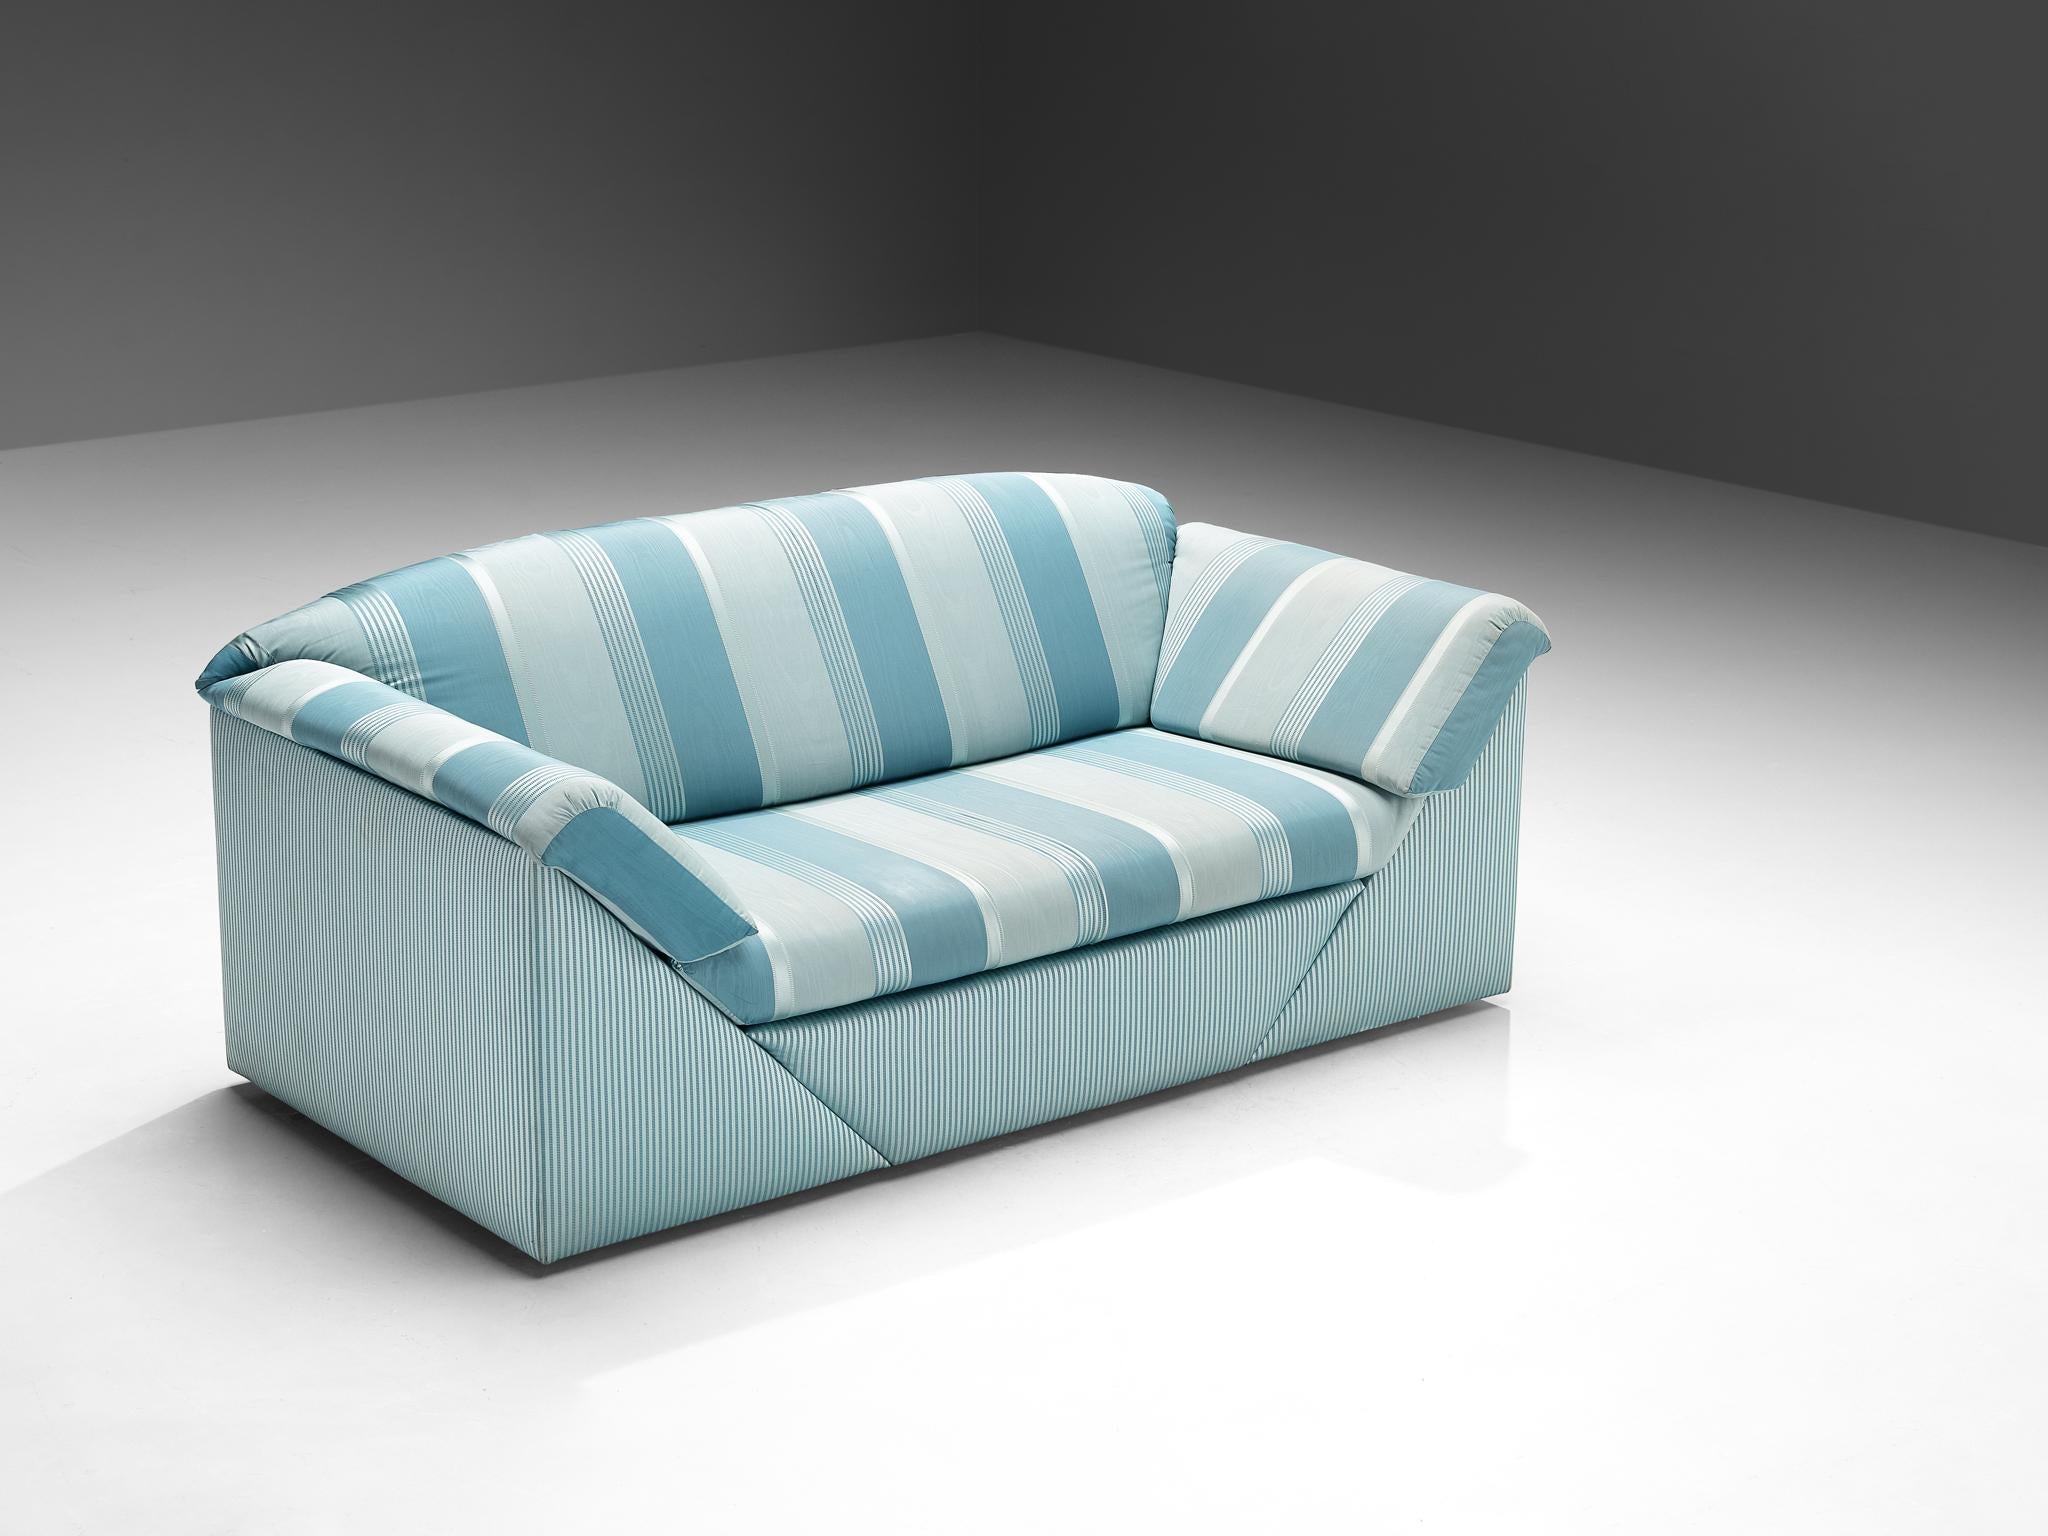 Substantial Sofa in Delicate Striped Green Blue Upholstery